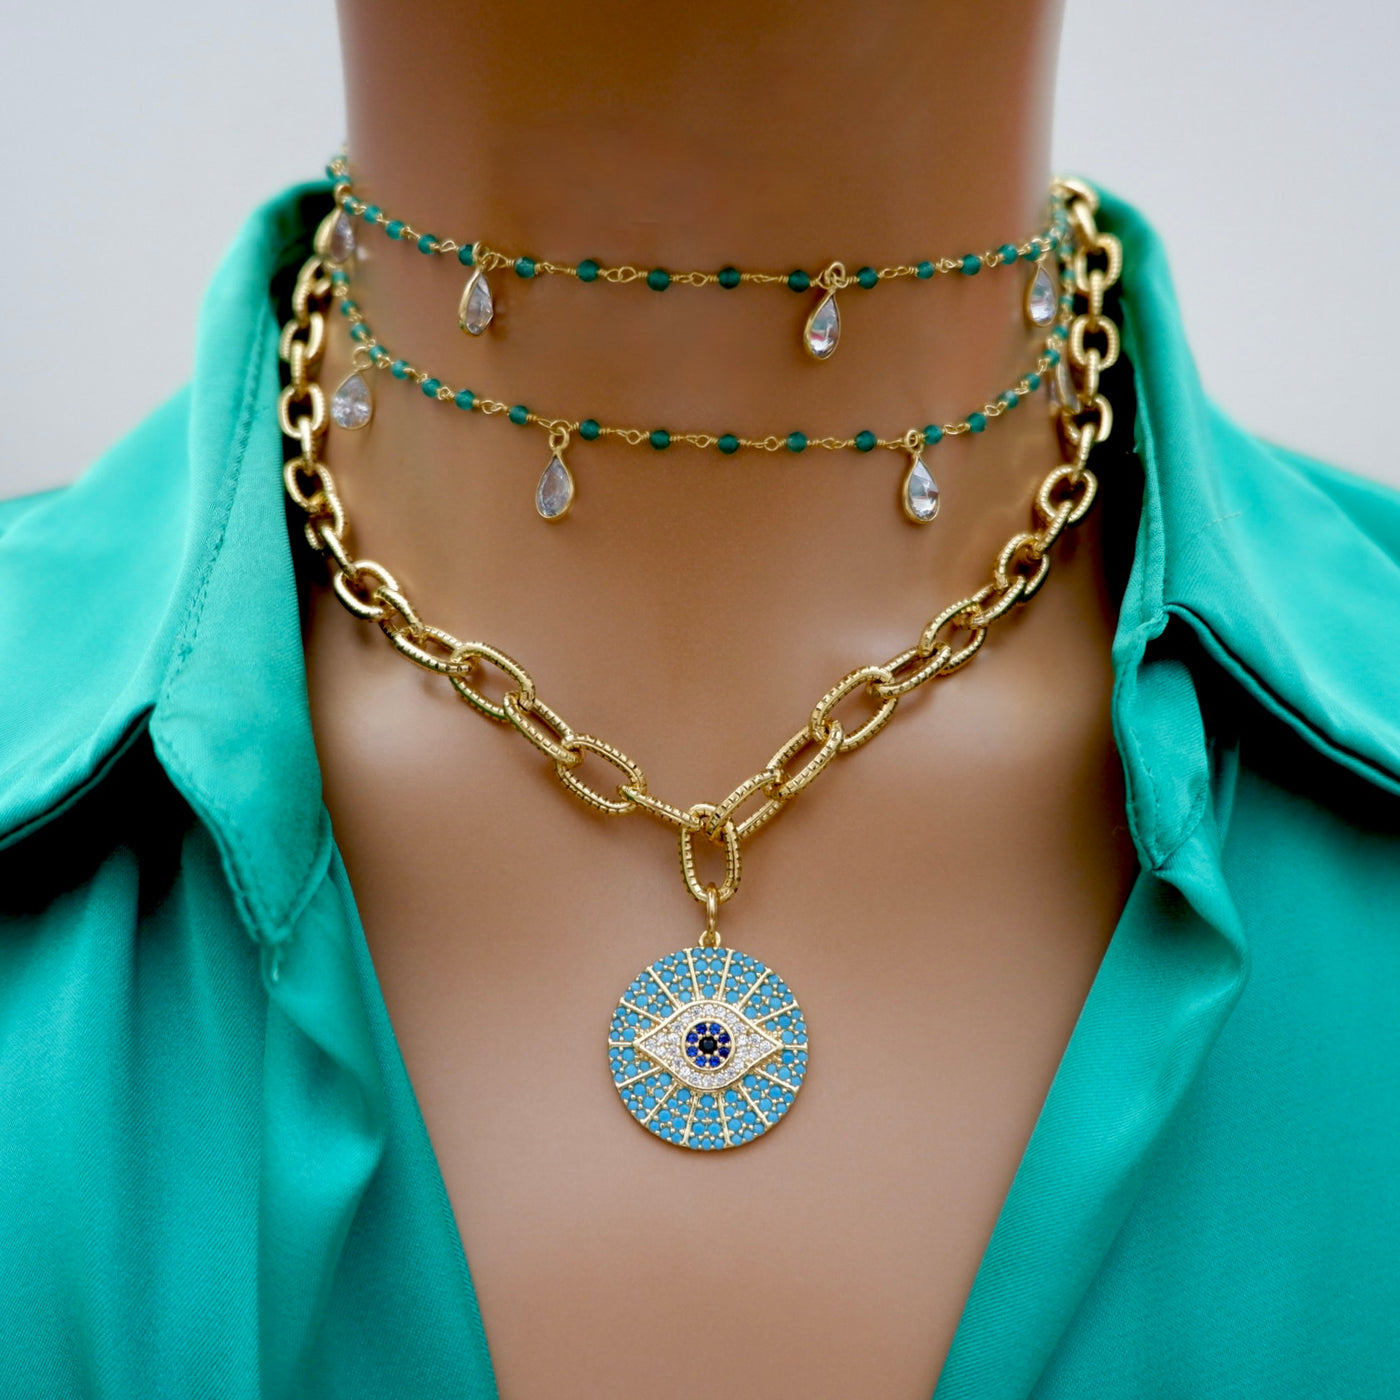 dangling drops jade chain necklace